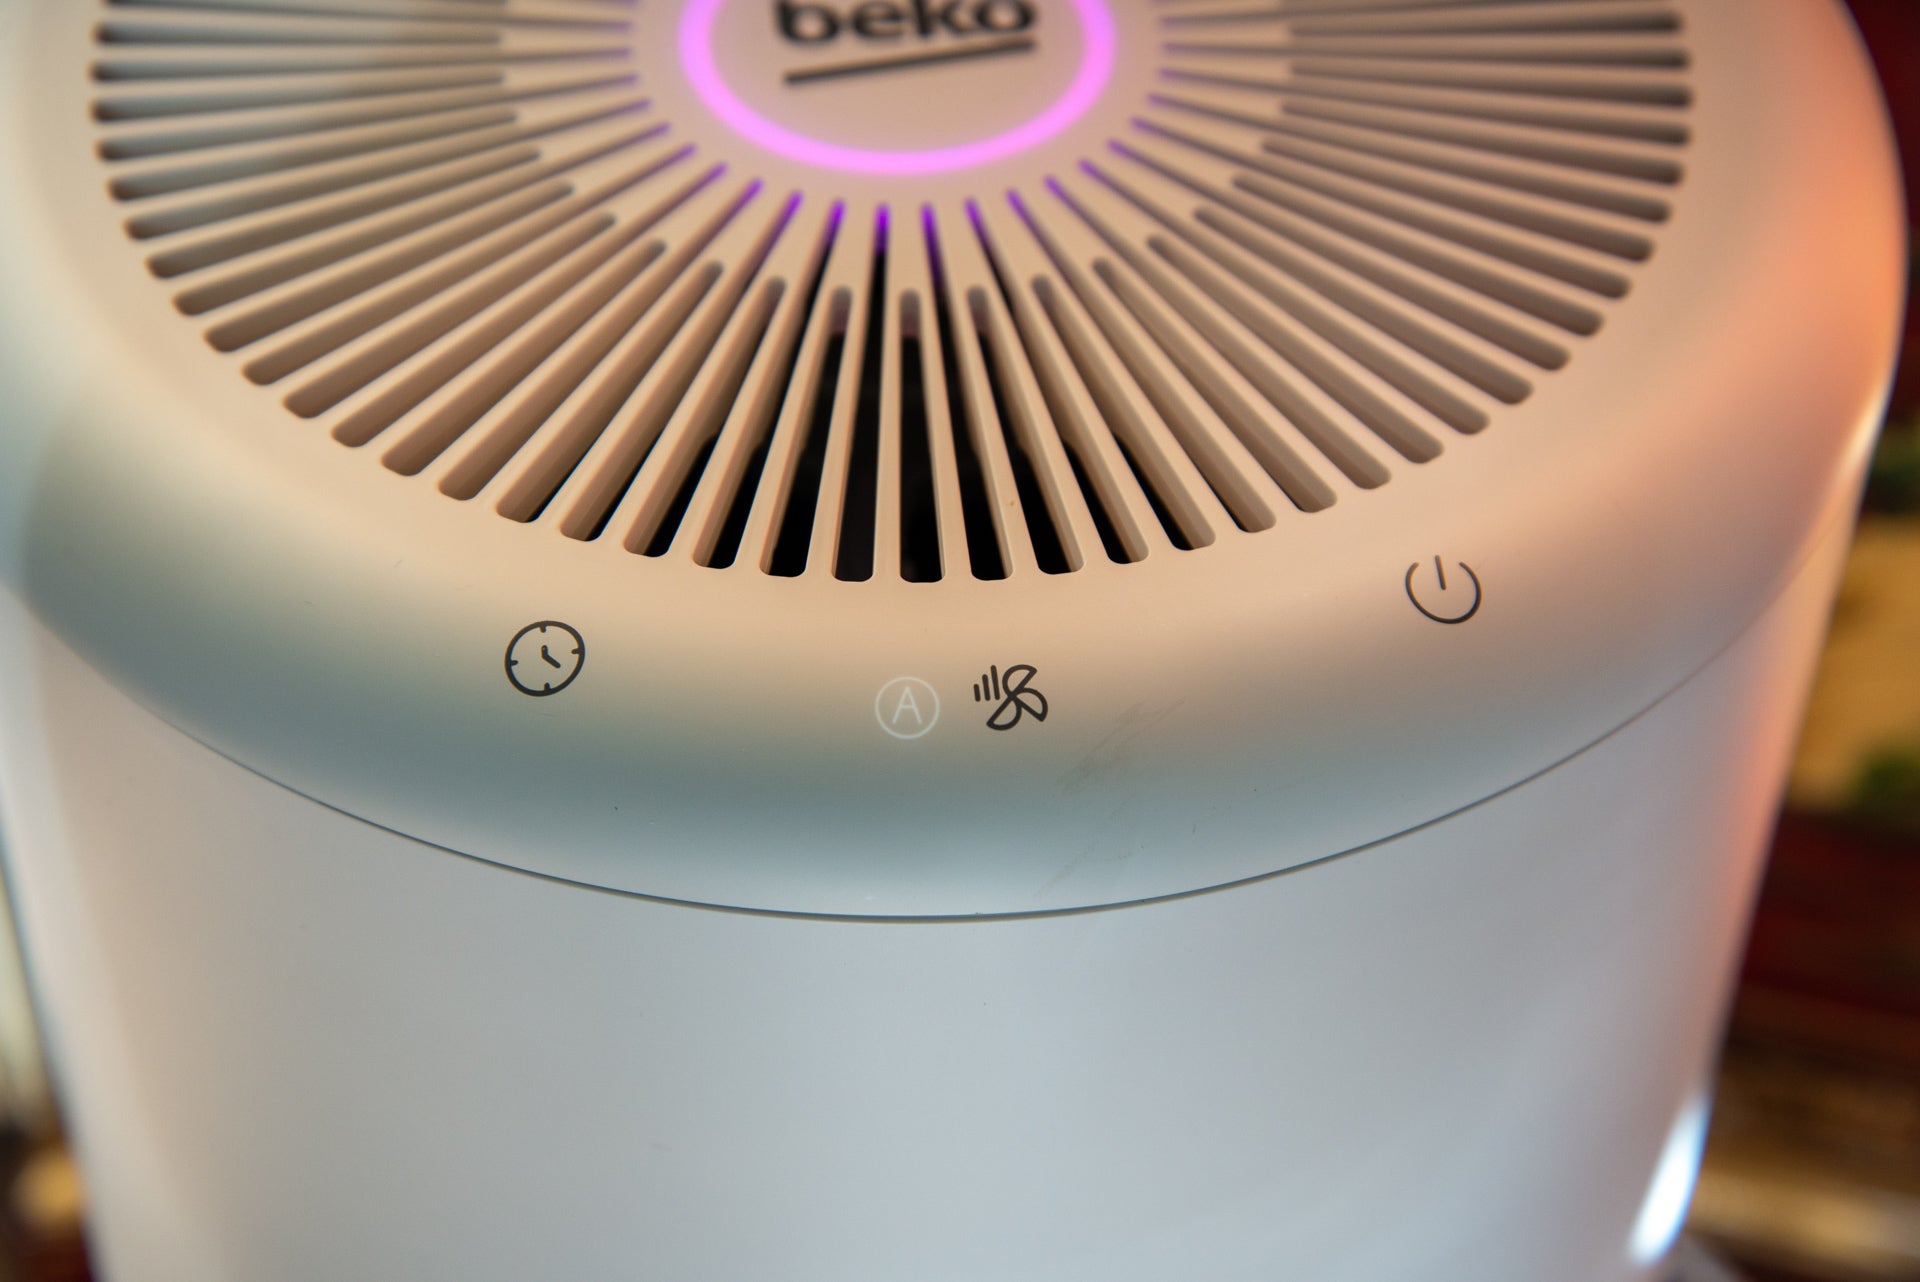 Beko Air Purifier with HEPA Filter and HygieneShield ATP6100I controls